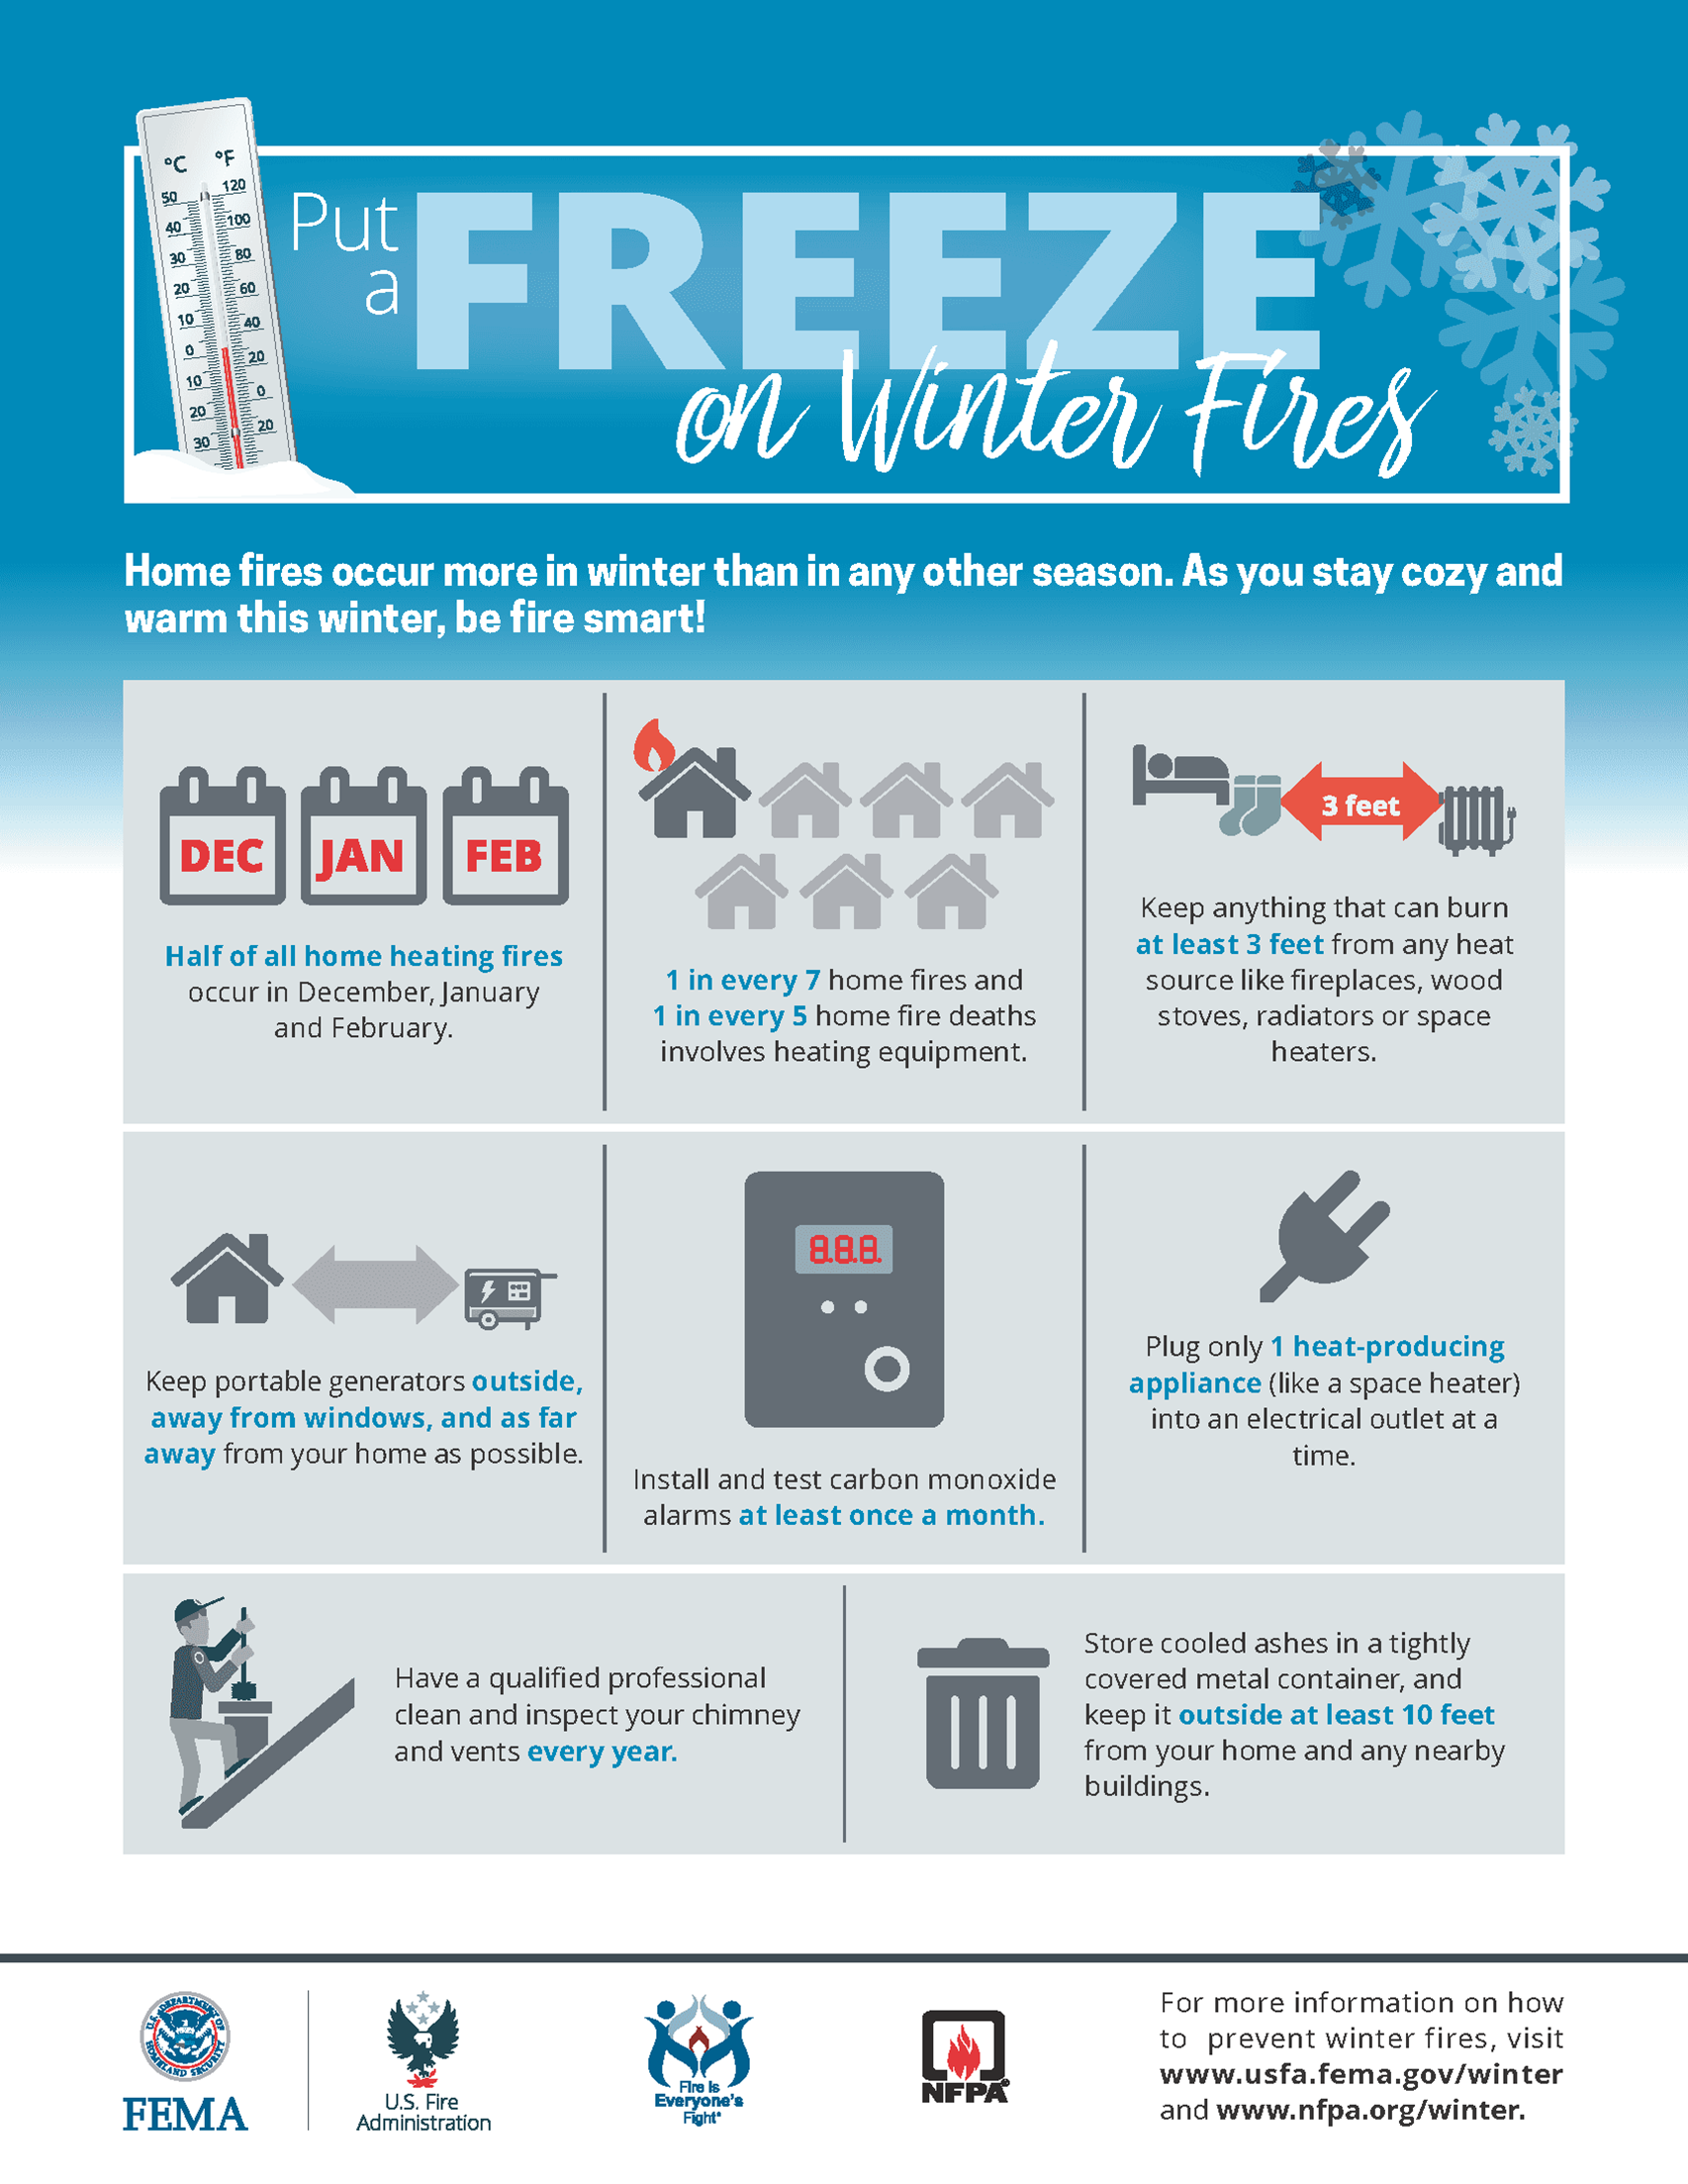 Freeze on winter fires